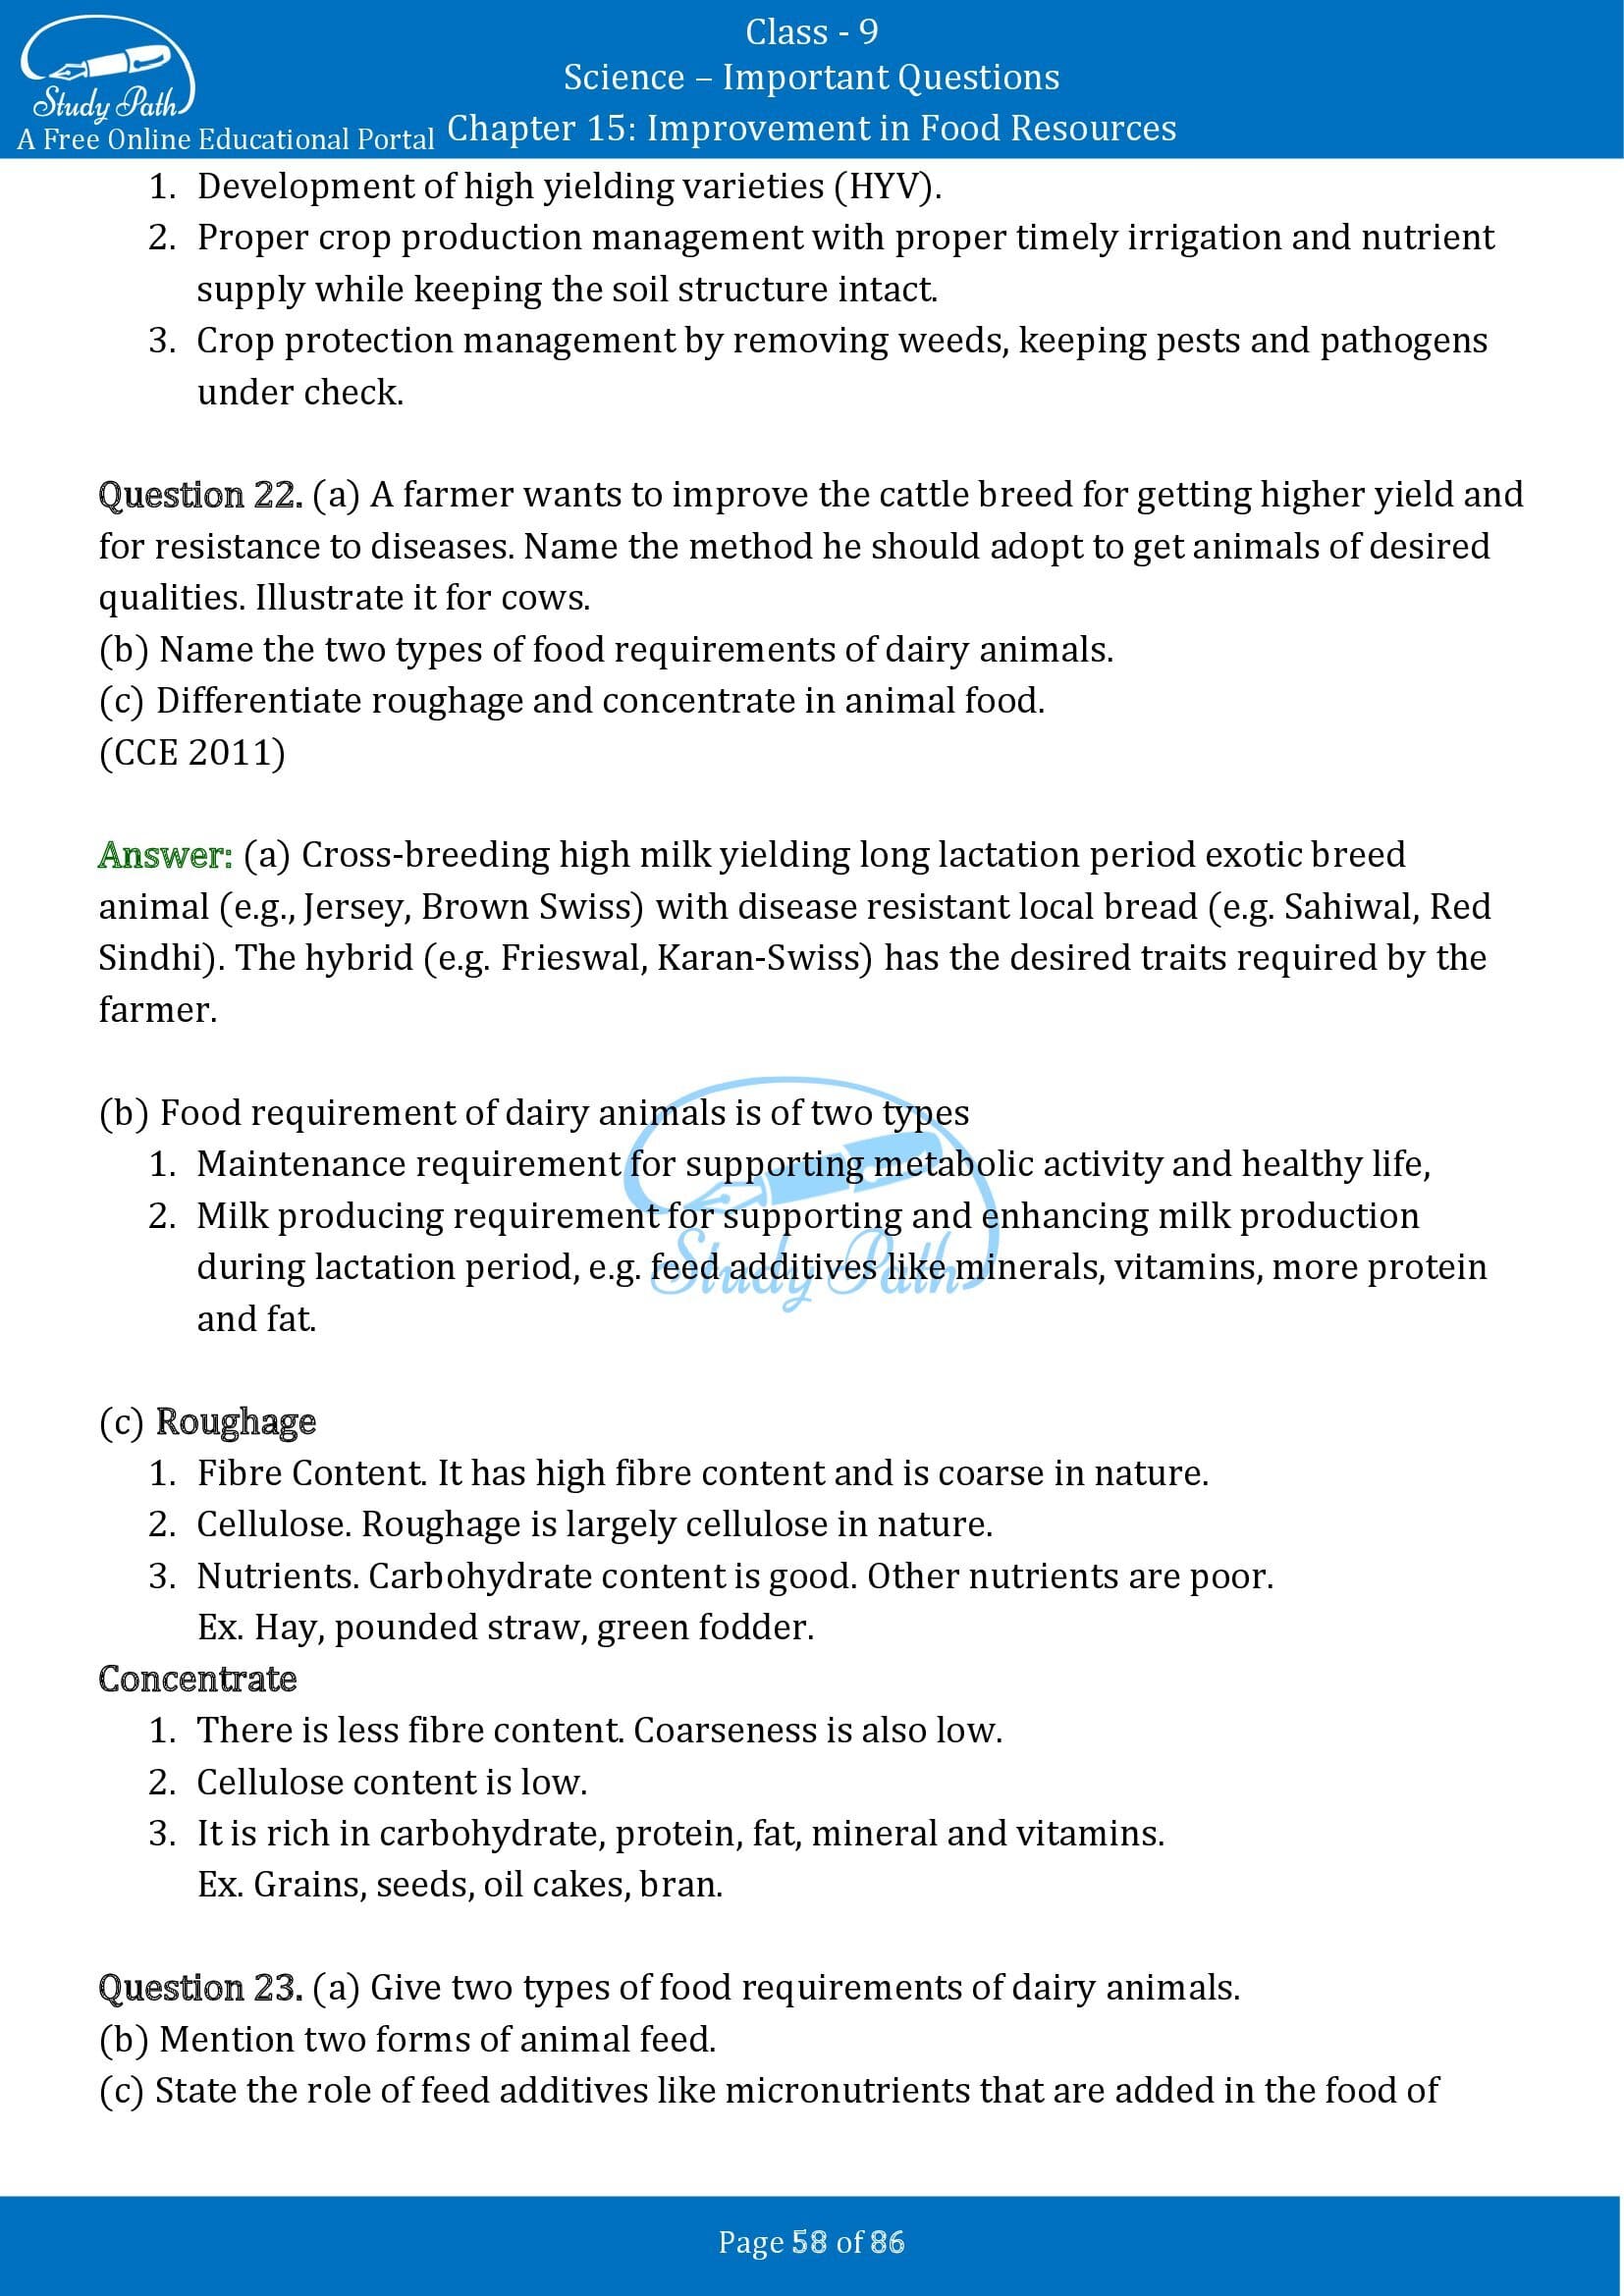 Important Questions for Class 9 Science Chapter 15 Improvement in Food Resources 00058